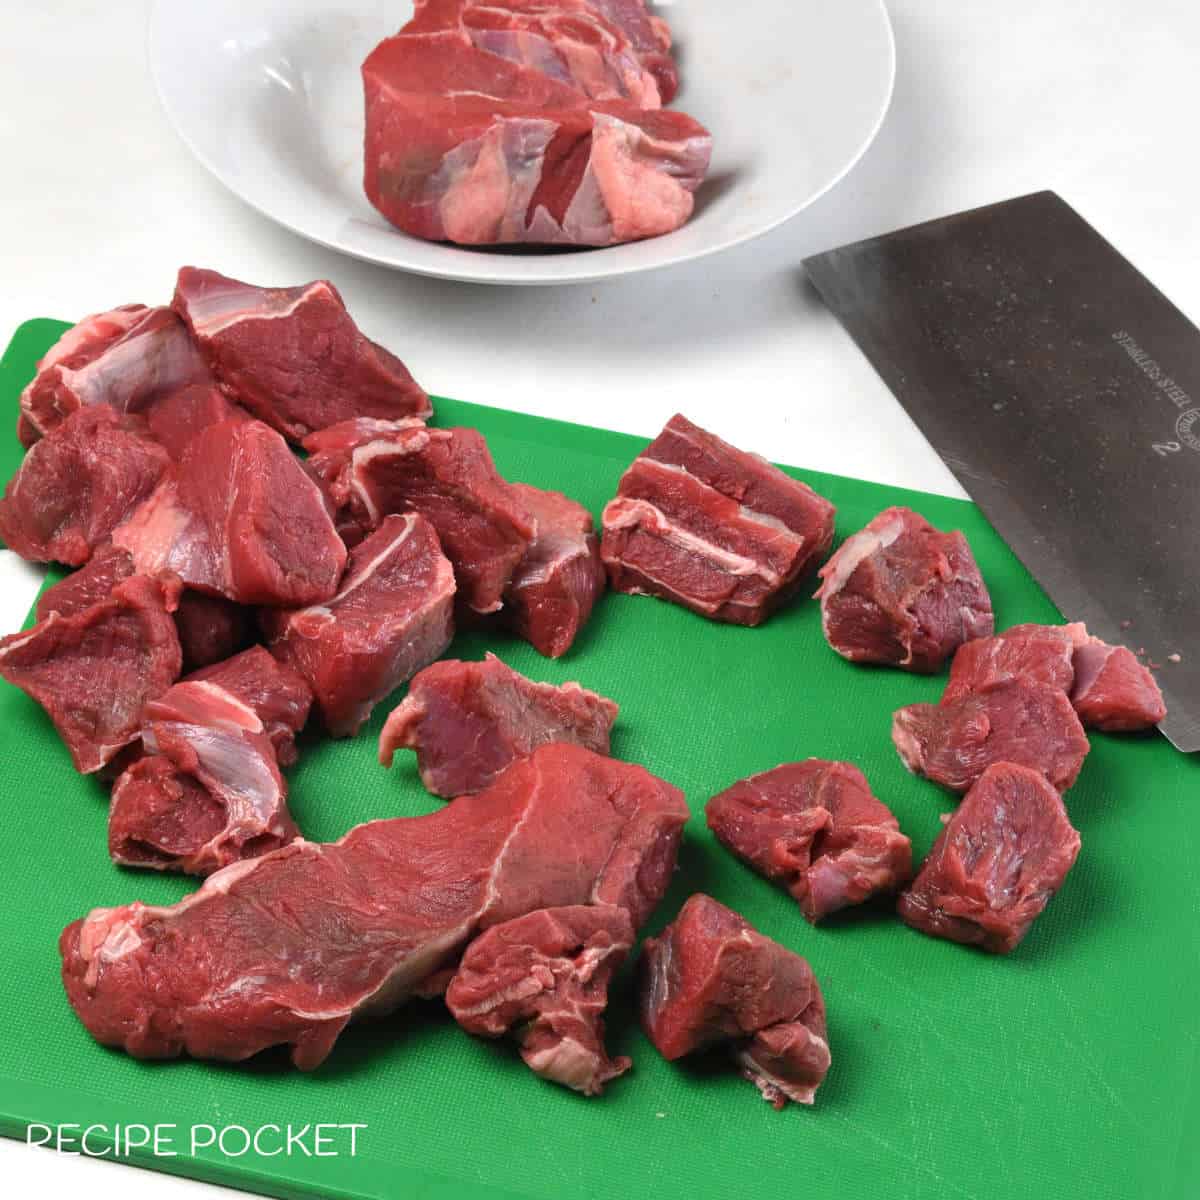 Cut pieces of meat on a green board.